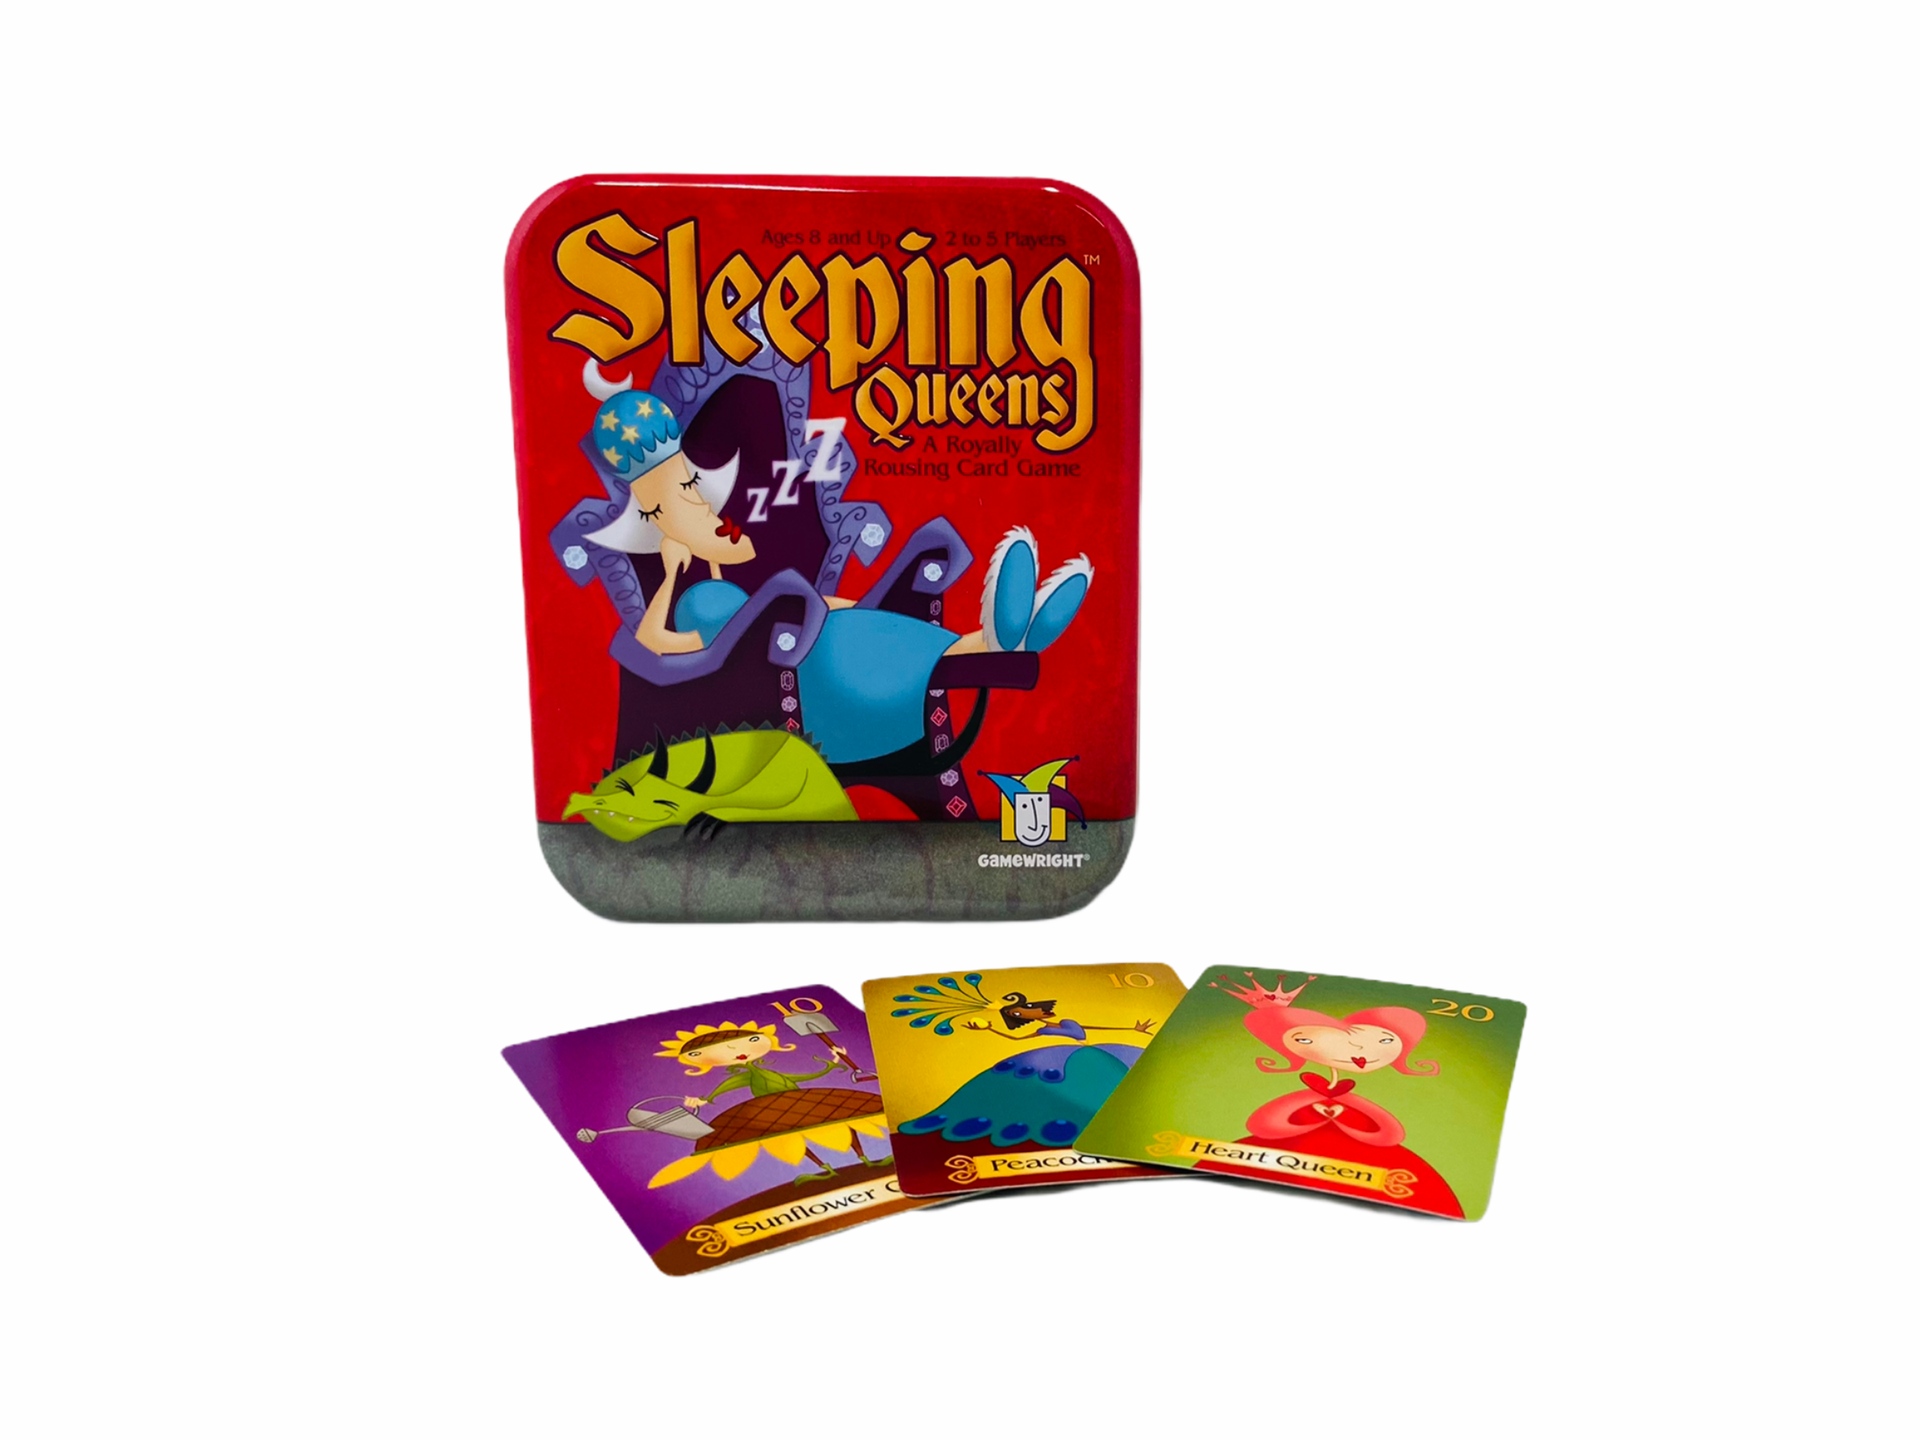 Sleeping Queens Anniversary Edition tin with 3 game play cards laid out in front on white background